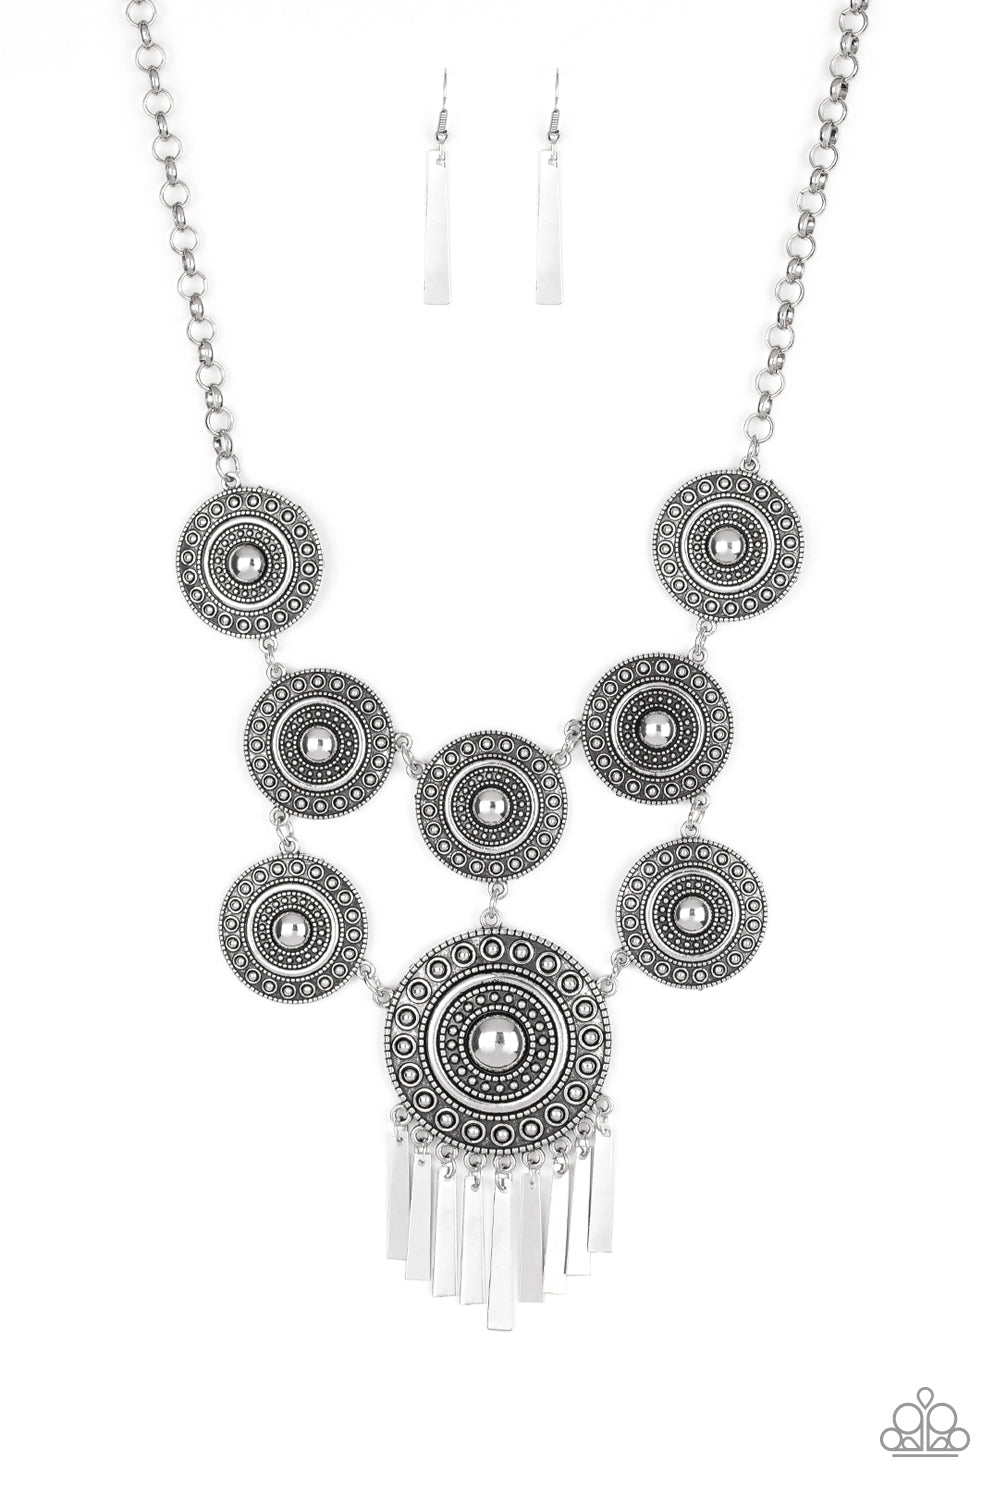 Modern Medalist Silver Necklace - TheMasterCollection